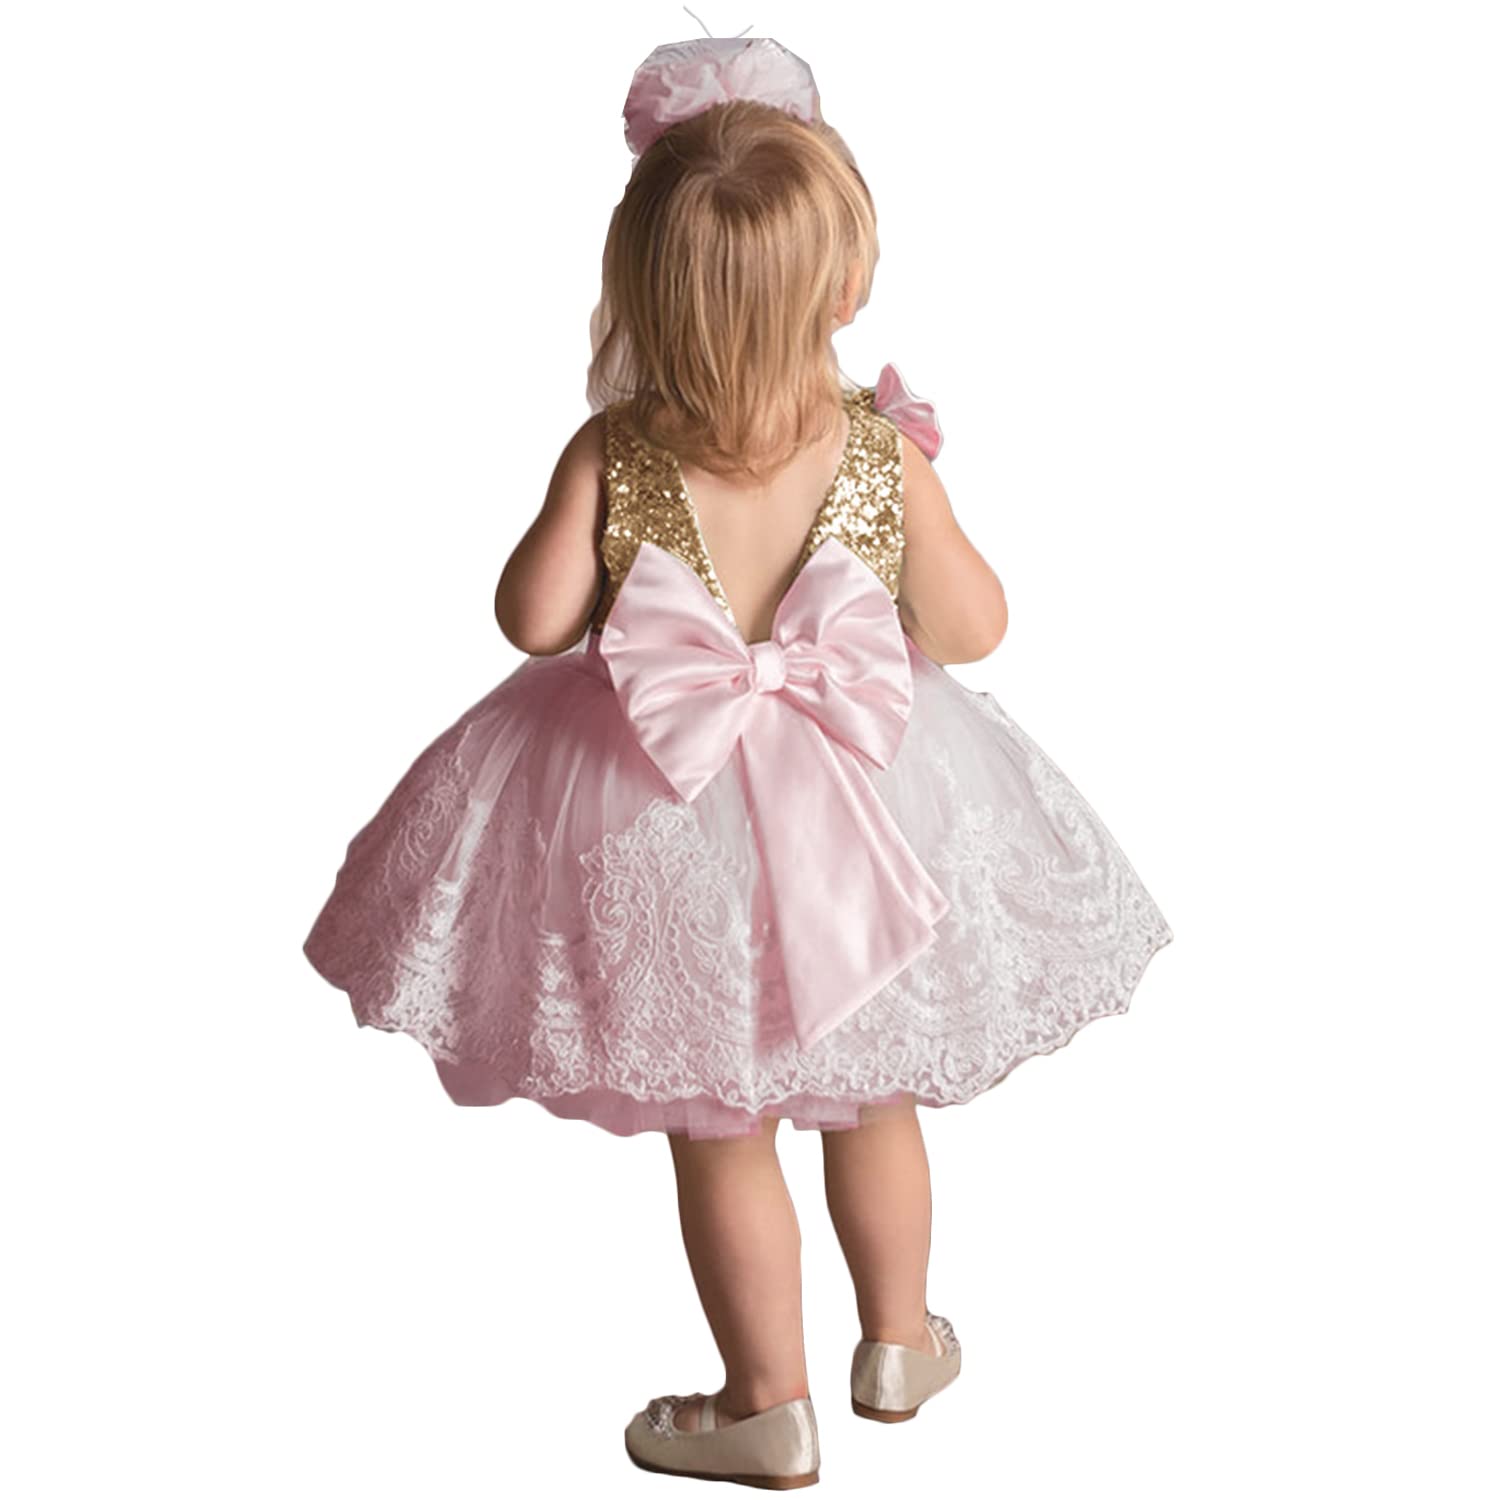 NNJXD Baby girl Dress Pageant Party Dresses Bowknot Toddler girls Lace christening Princess 2004 Pink Size (120) 4-5 Years